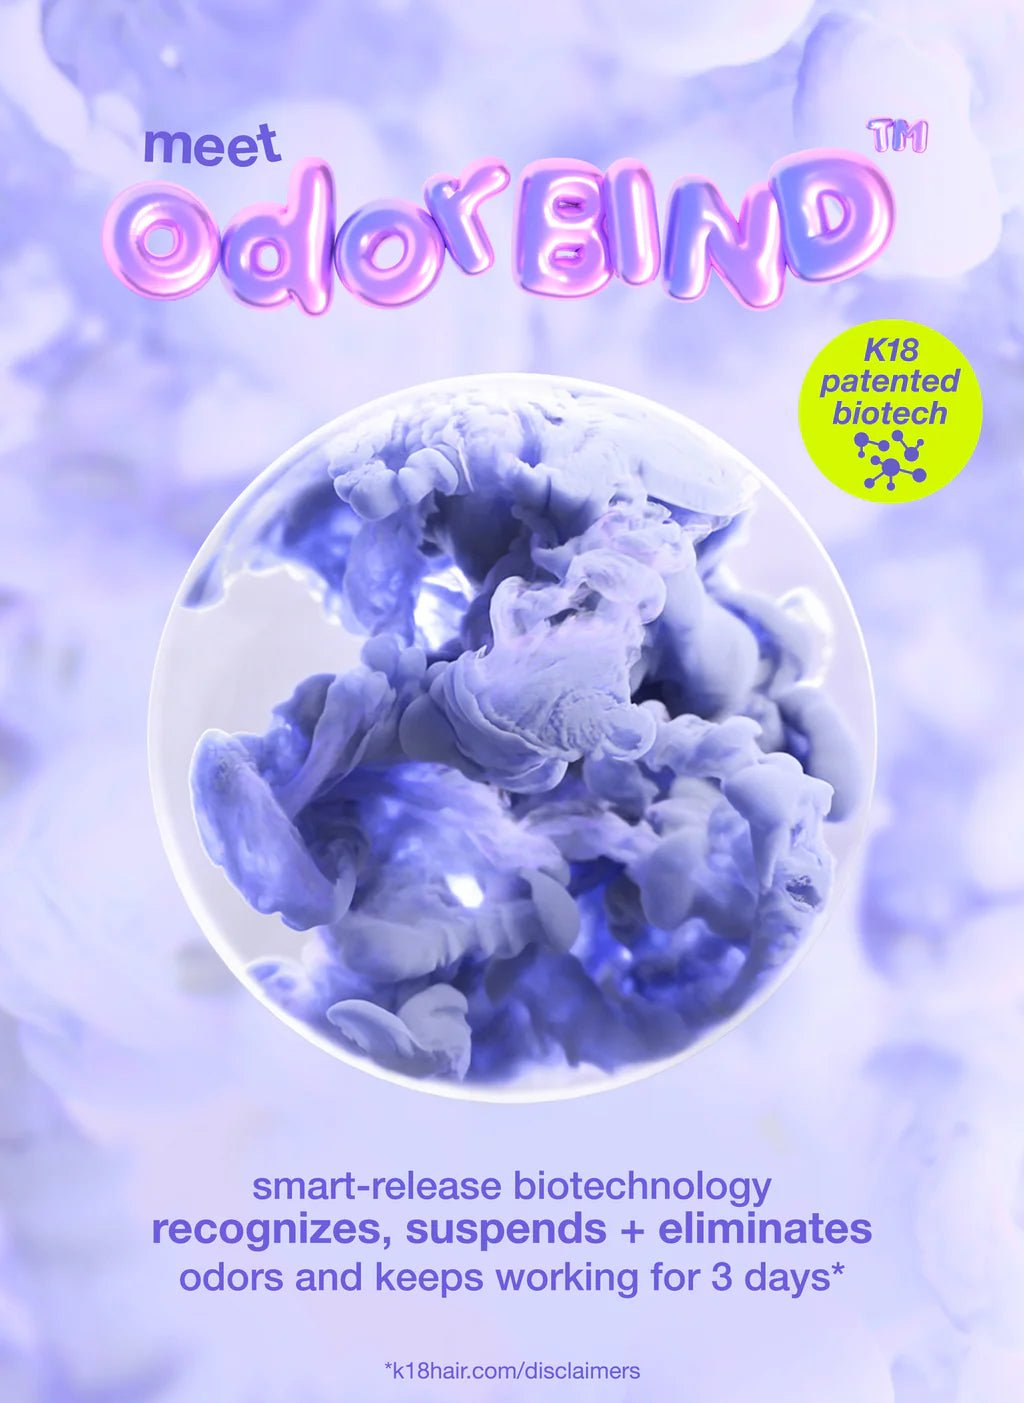 A promotional poster for "K18 AirWash Dry Shampoo" featuring K18 patented biotech from Simply Colour Hair Salon Studio & Online Store. Text highlights odorBIND biotechnology that recognizes, suspends, and eliminates odors for 3 days. Background shows a purple abstract design. The product also functions as a dry shampoo that reduces oil in your hair.